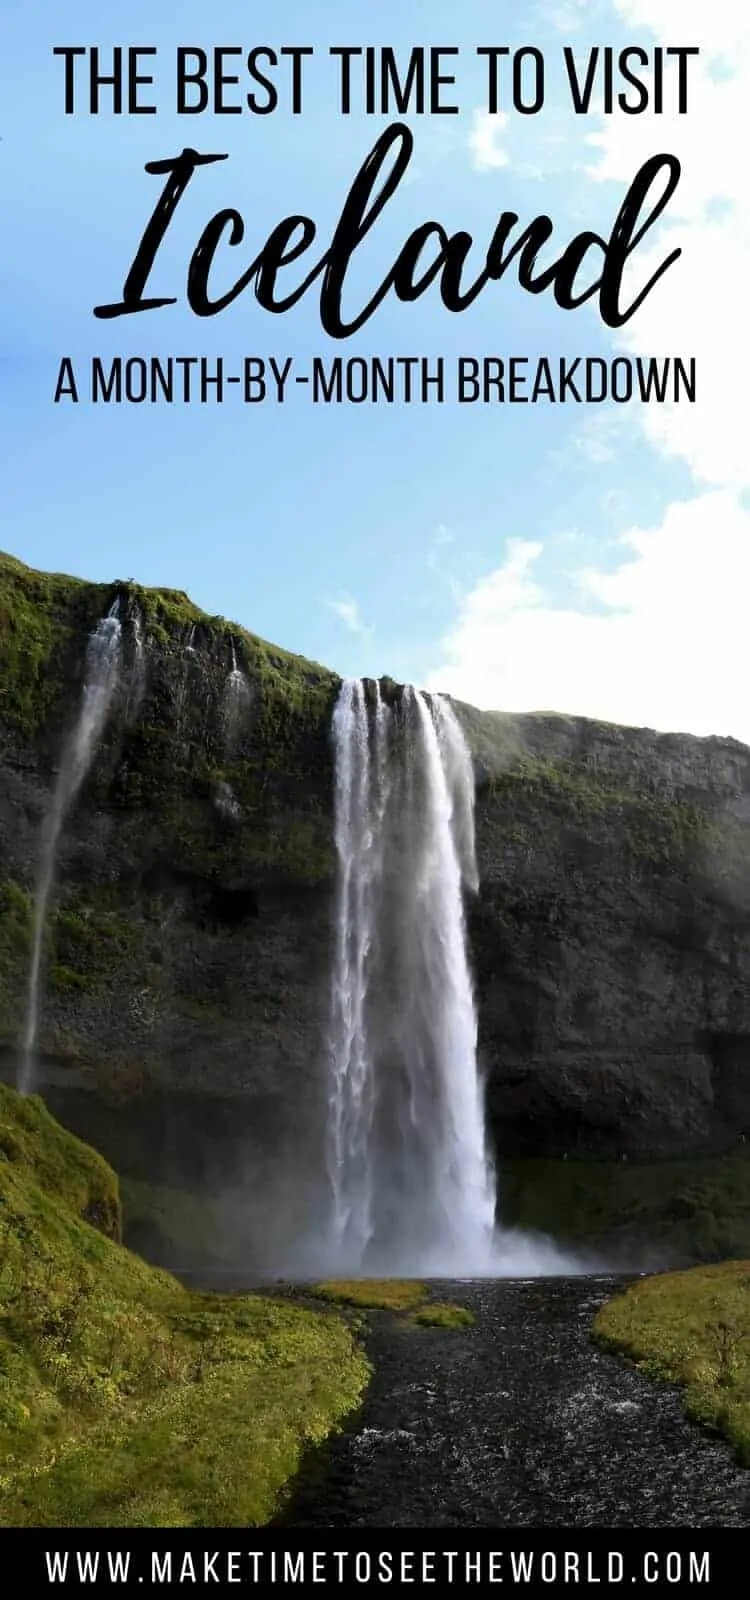 The Best Time To Visit Iceland - A Season by Season Guide